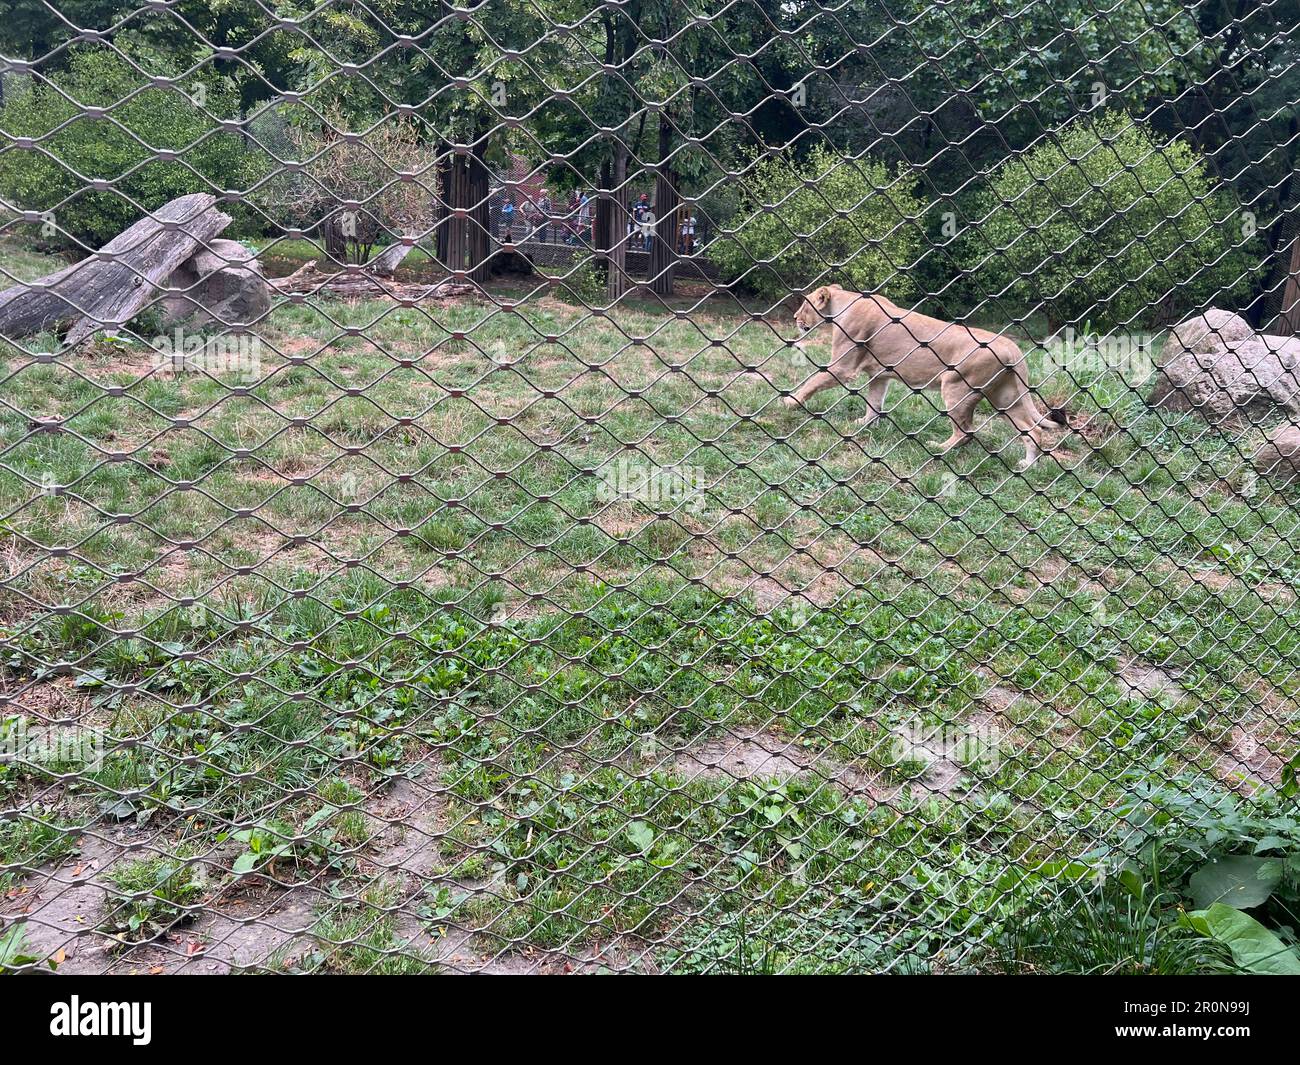 Beautiful healthy African lioness in zoo enclosure Stock Photo